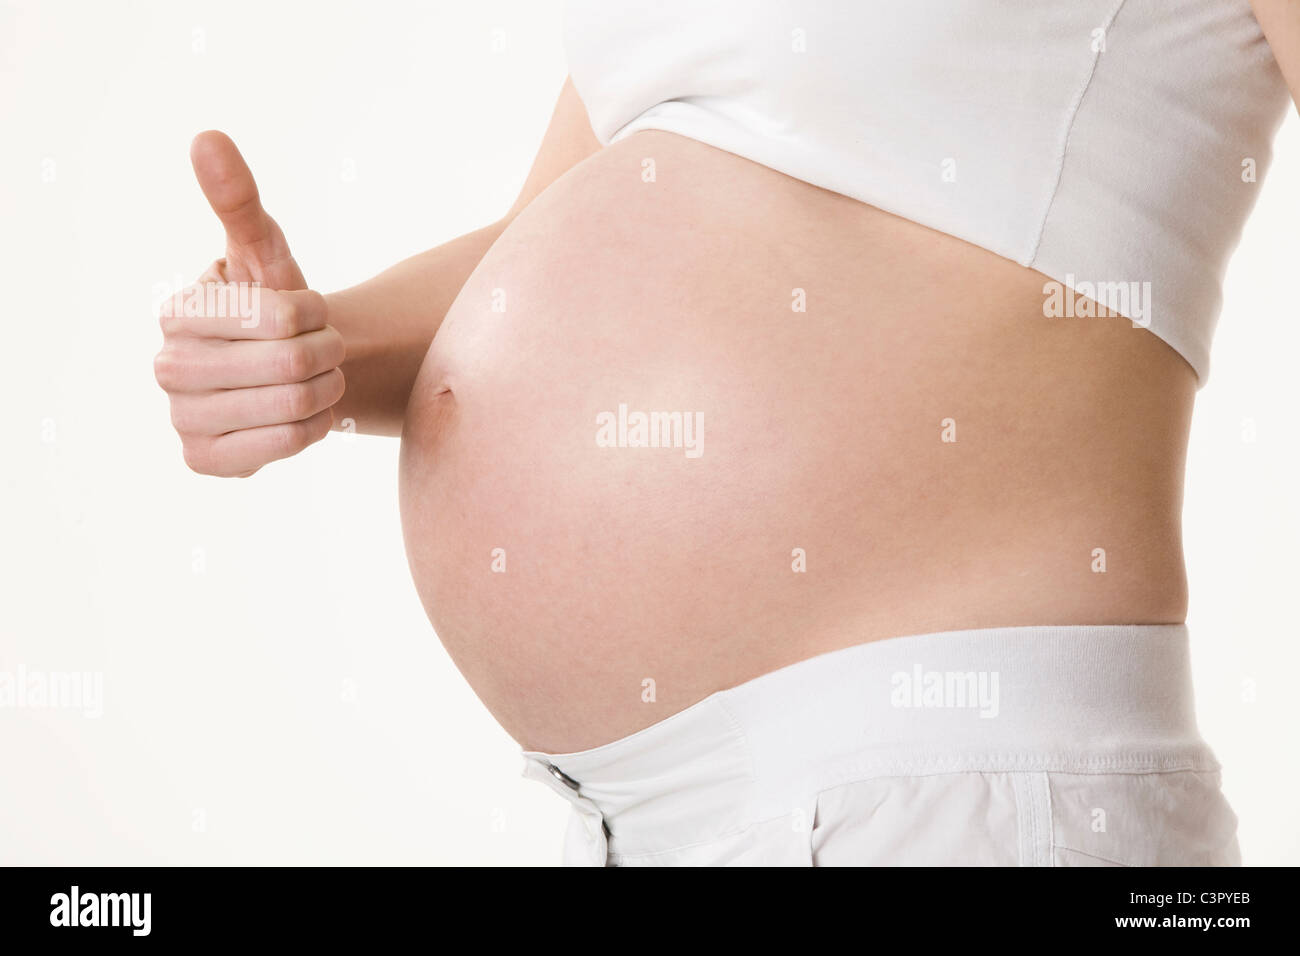 Pregnant woman showing Thumbs up sign, mid section Banque D'Images